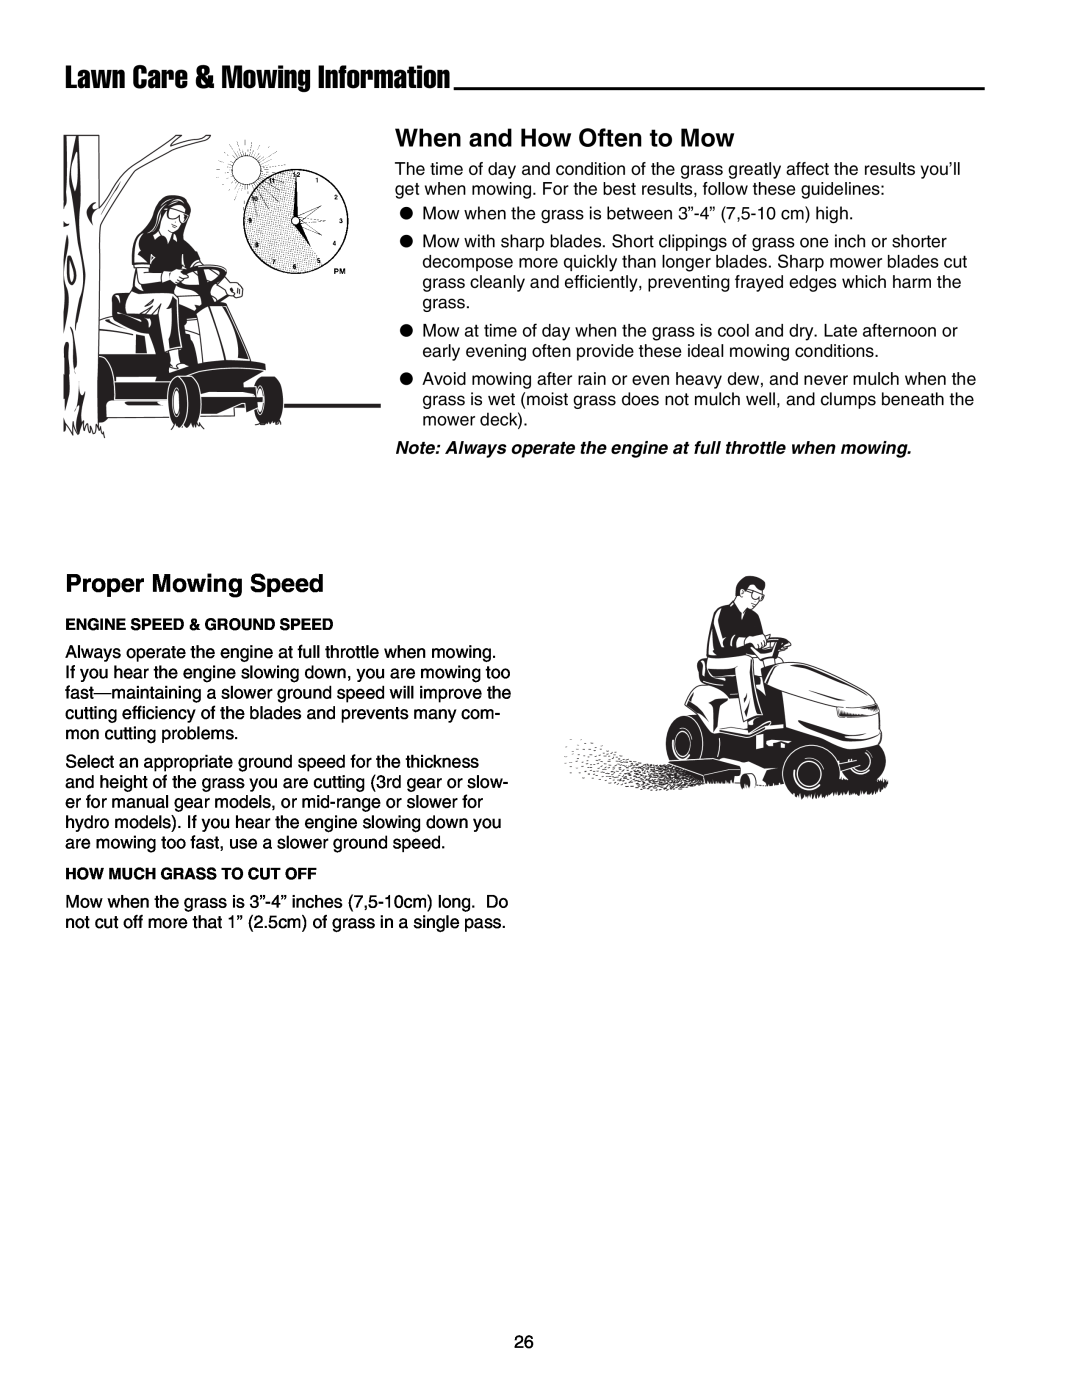 Snapper 1700, 2700, 400 manual Lawn Care & Mowing Information, When and How Often to Mow, Proper Mowing Speed 